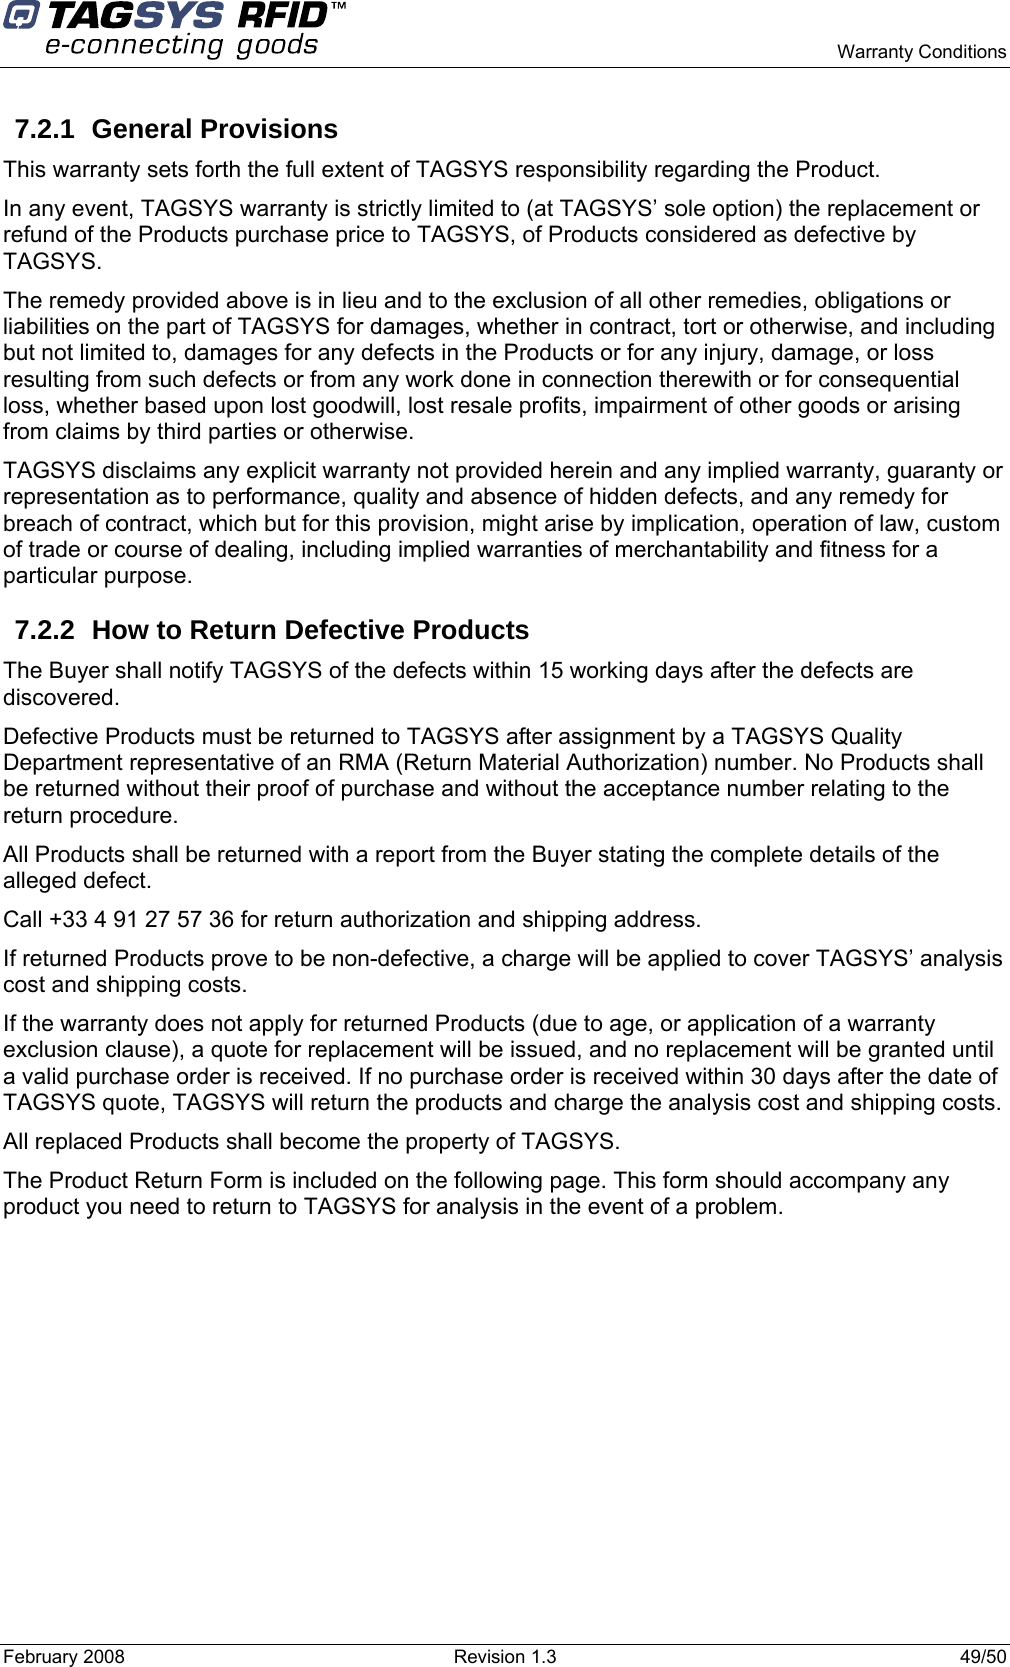      Warranty Conditions February 2008  Revision 1.3  49/50  7.2.1 General Provisions This warranty sets forth the full extent of TAGSYS responsibility regarding the Product. In any event, TAGSYS warranty is strictly limited to (at TAGSYS’ sole option) the replacement or refund of the Products purchase price to TAGSYS, of Products considered as defective by TAGSYS. The remedy provided above is in lieu and to the exclusion of all other remedies, obligations or liabilities on the part of TAGSYS for damages, whether in contract, tort or otherwise, and including but not limited to, damages for any defects in the Products or for any injury, damage, or loss resulting from such defects or from any work done in connection therewith or for consequential loss, whether based upon lost goodwill, lost resale profits, impairment of other goods or arising from claims by third parties or otherwise. TAGSYS disclaims any explicit warranty not provided herein and any implied warranty, guaranty or representation as to performance, quality and absence of hidden defects, and any remedy for breach of contract, which but for this provision, might arise by implication, operation of law, custom of trade or course of dealing, including implied warranties of merchantability and fitness for a particular purpose. 7.2.2  How to Return Defective Products The Buyer shall notify TAGSYS of the defects within 15 working days after the defects are discovered. Defective Products must be returned to TAGSYS after assignment by a TAGSYS Quality Department representative of an RMA (Return Material Authorization) number. No Products shall be returned without their proof of purchase and without the acceptance number relating to the return procedure. All Products shall be returned with a report from the Buyer stating the complete details of the alleged defect. Call +33 4 91 27 57 36 for return authorization and shipping address. If returned Products prove to be non-defective, a charge will be applied to cover TAGSYS’ analysis cost and shipping costs. If the warranty does not apply for returned Products (due to age, or application of a warranty exclusion clause), a quote for replacement will be issued, and no replacement will be granted until a valid purchase order is received. If no purchase order is received within 30 days after the date of TAGSYS quote, TAGSYS will return the products and charge the analysis cost and shipping costs. All replaced Products shall become the property of TAGSYS. The Product Return Form is included on the following page. This form should accompany any product you need to return to TAGSYS for analysis in the event of a problem. 